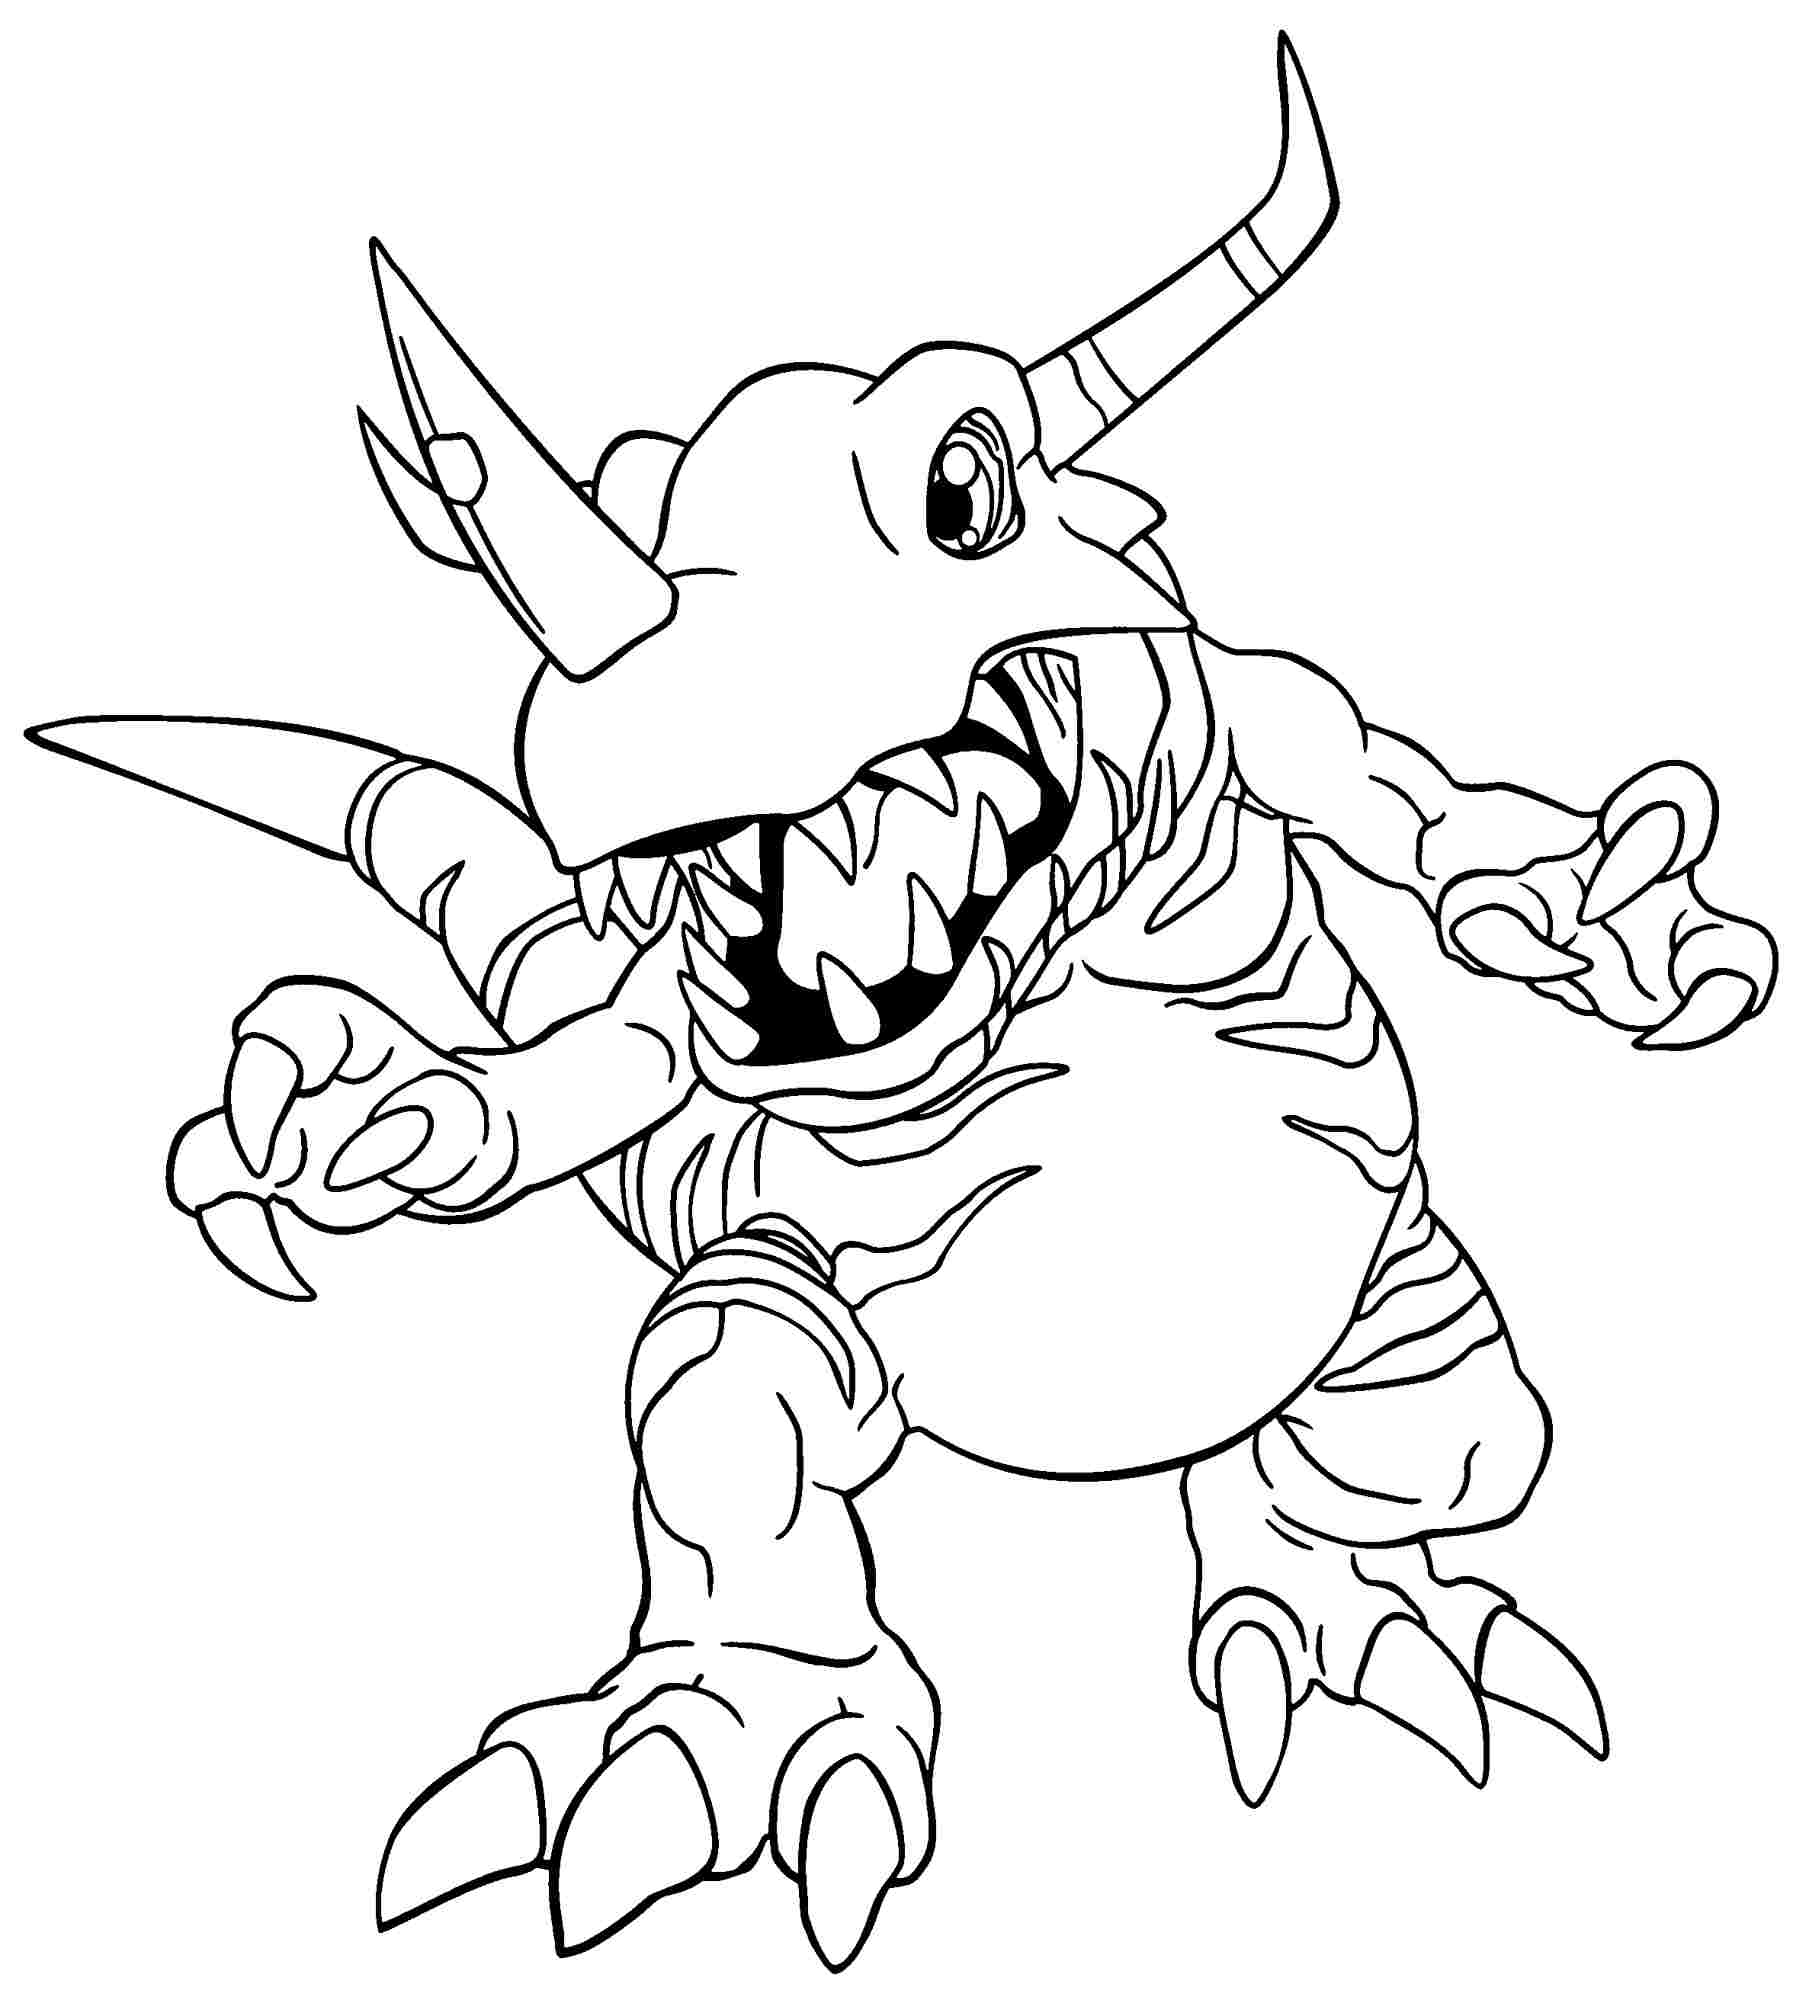 Coloring pages Digimon (Cartoons) – Printable Coloring Pages